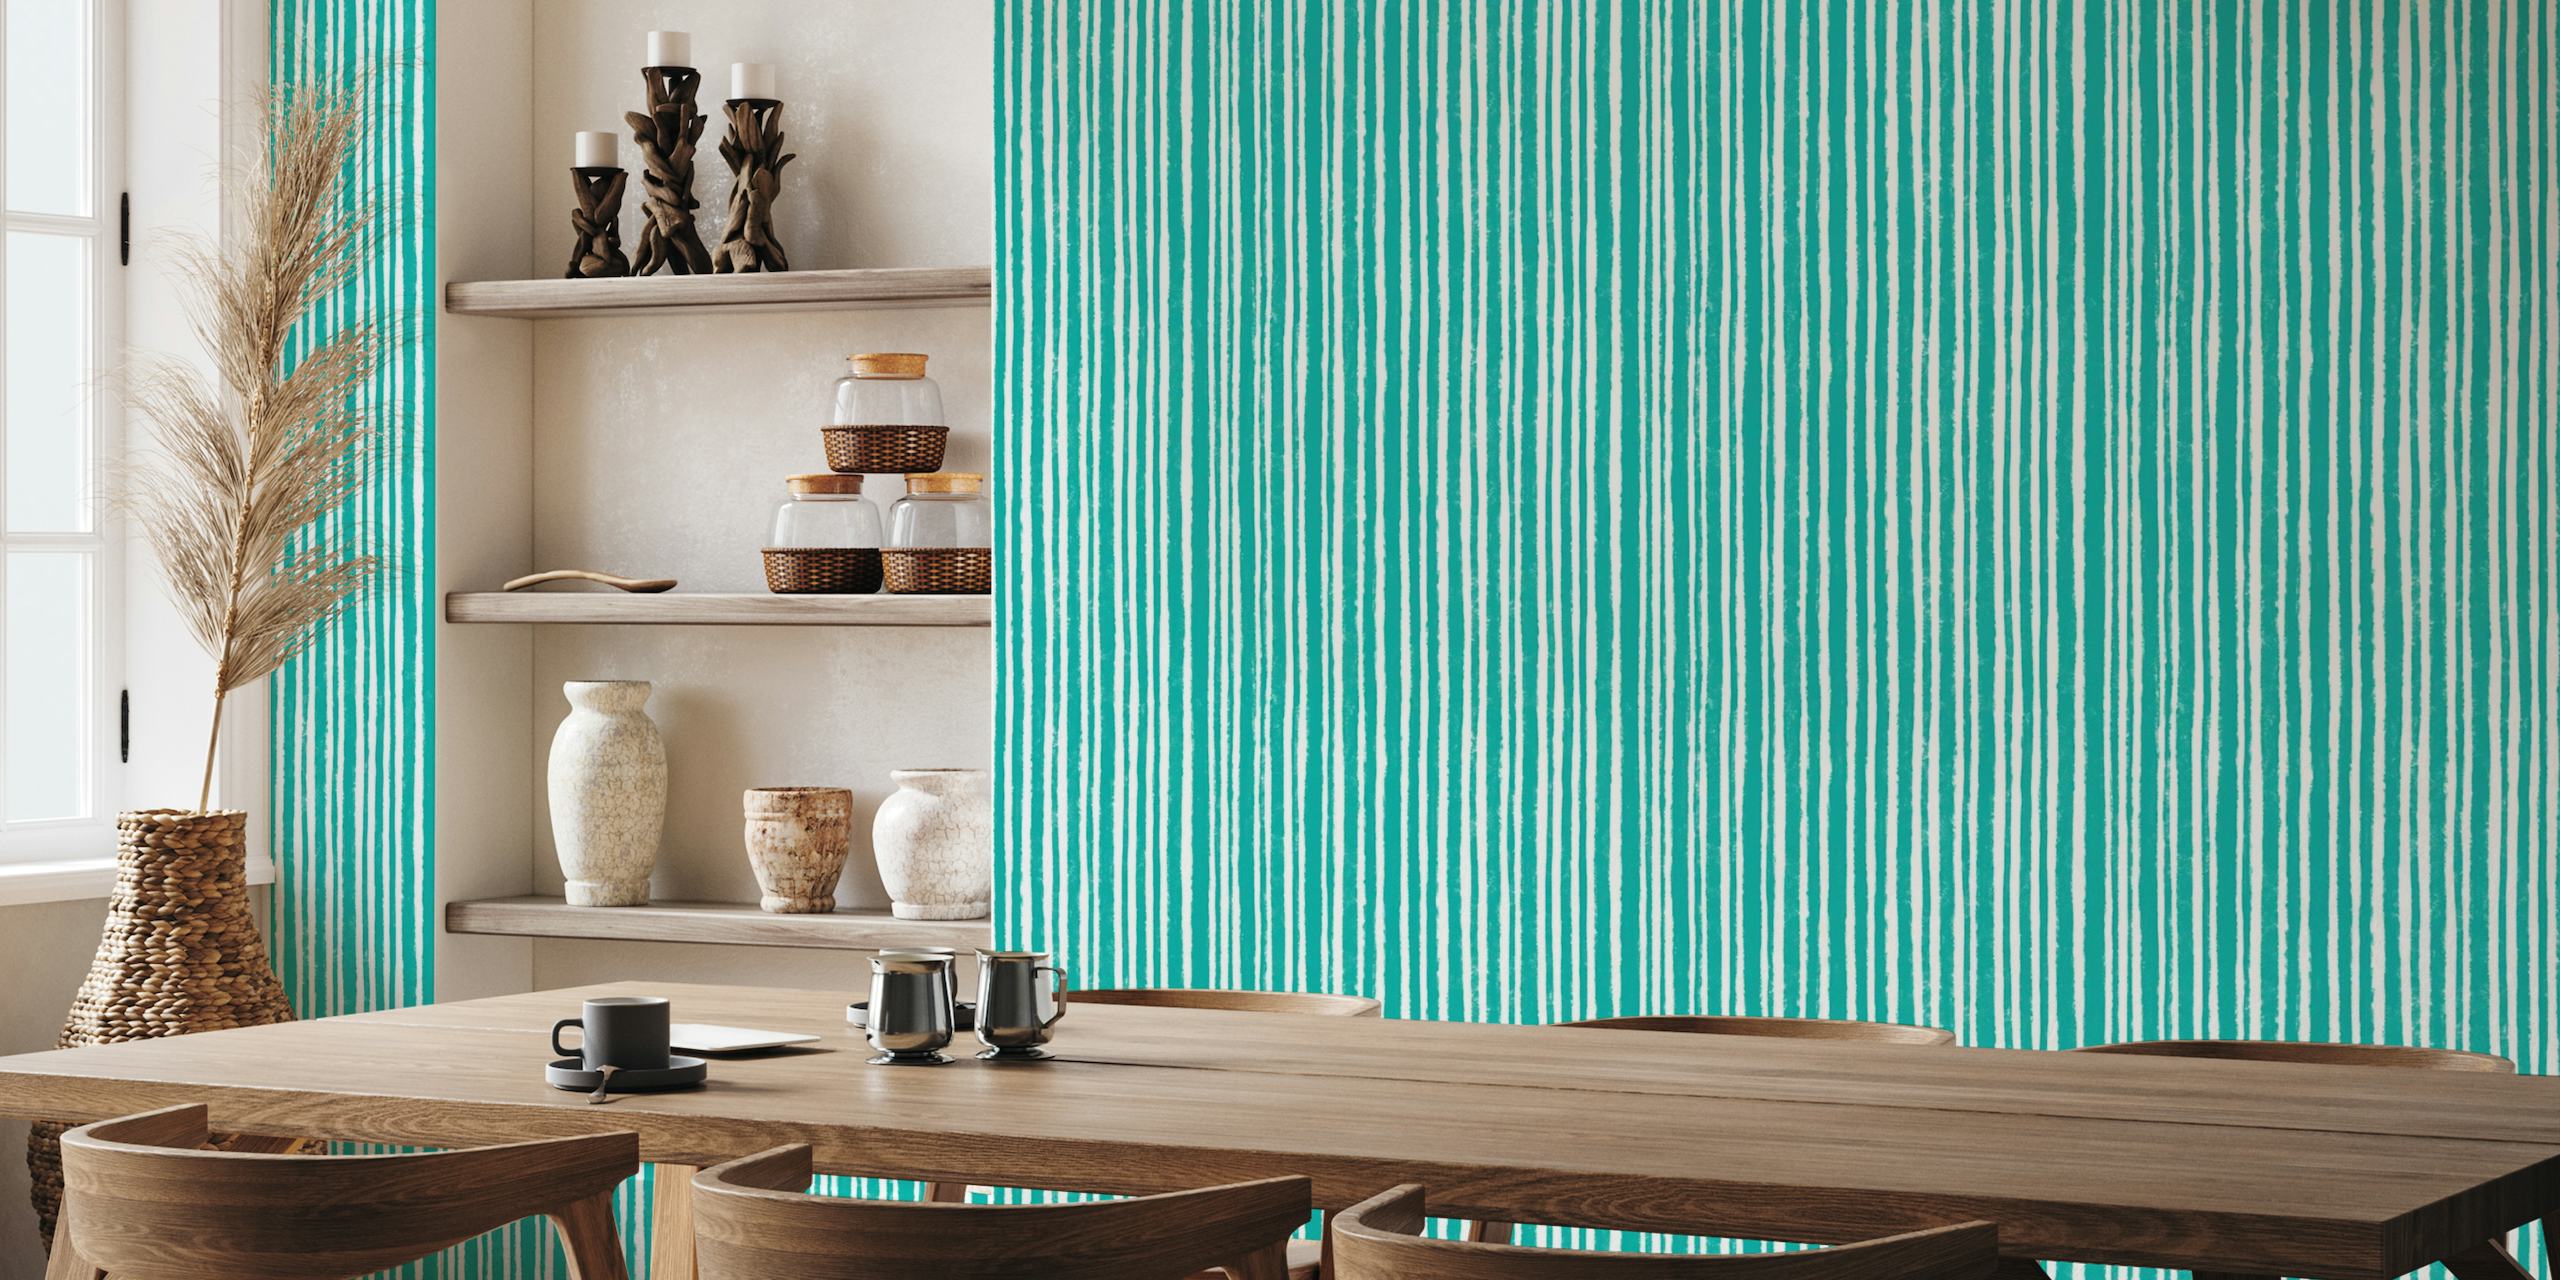 Vertical & Textured Stripes -Tiffany Blue tapete